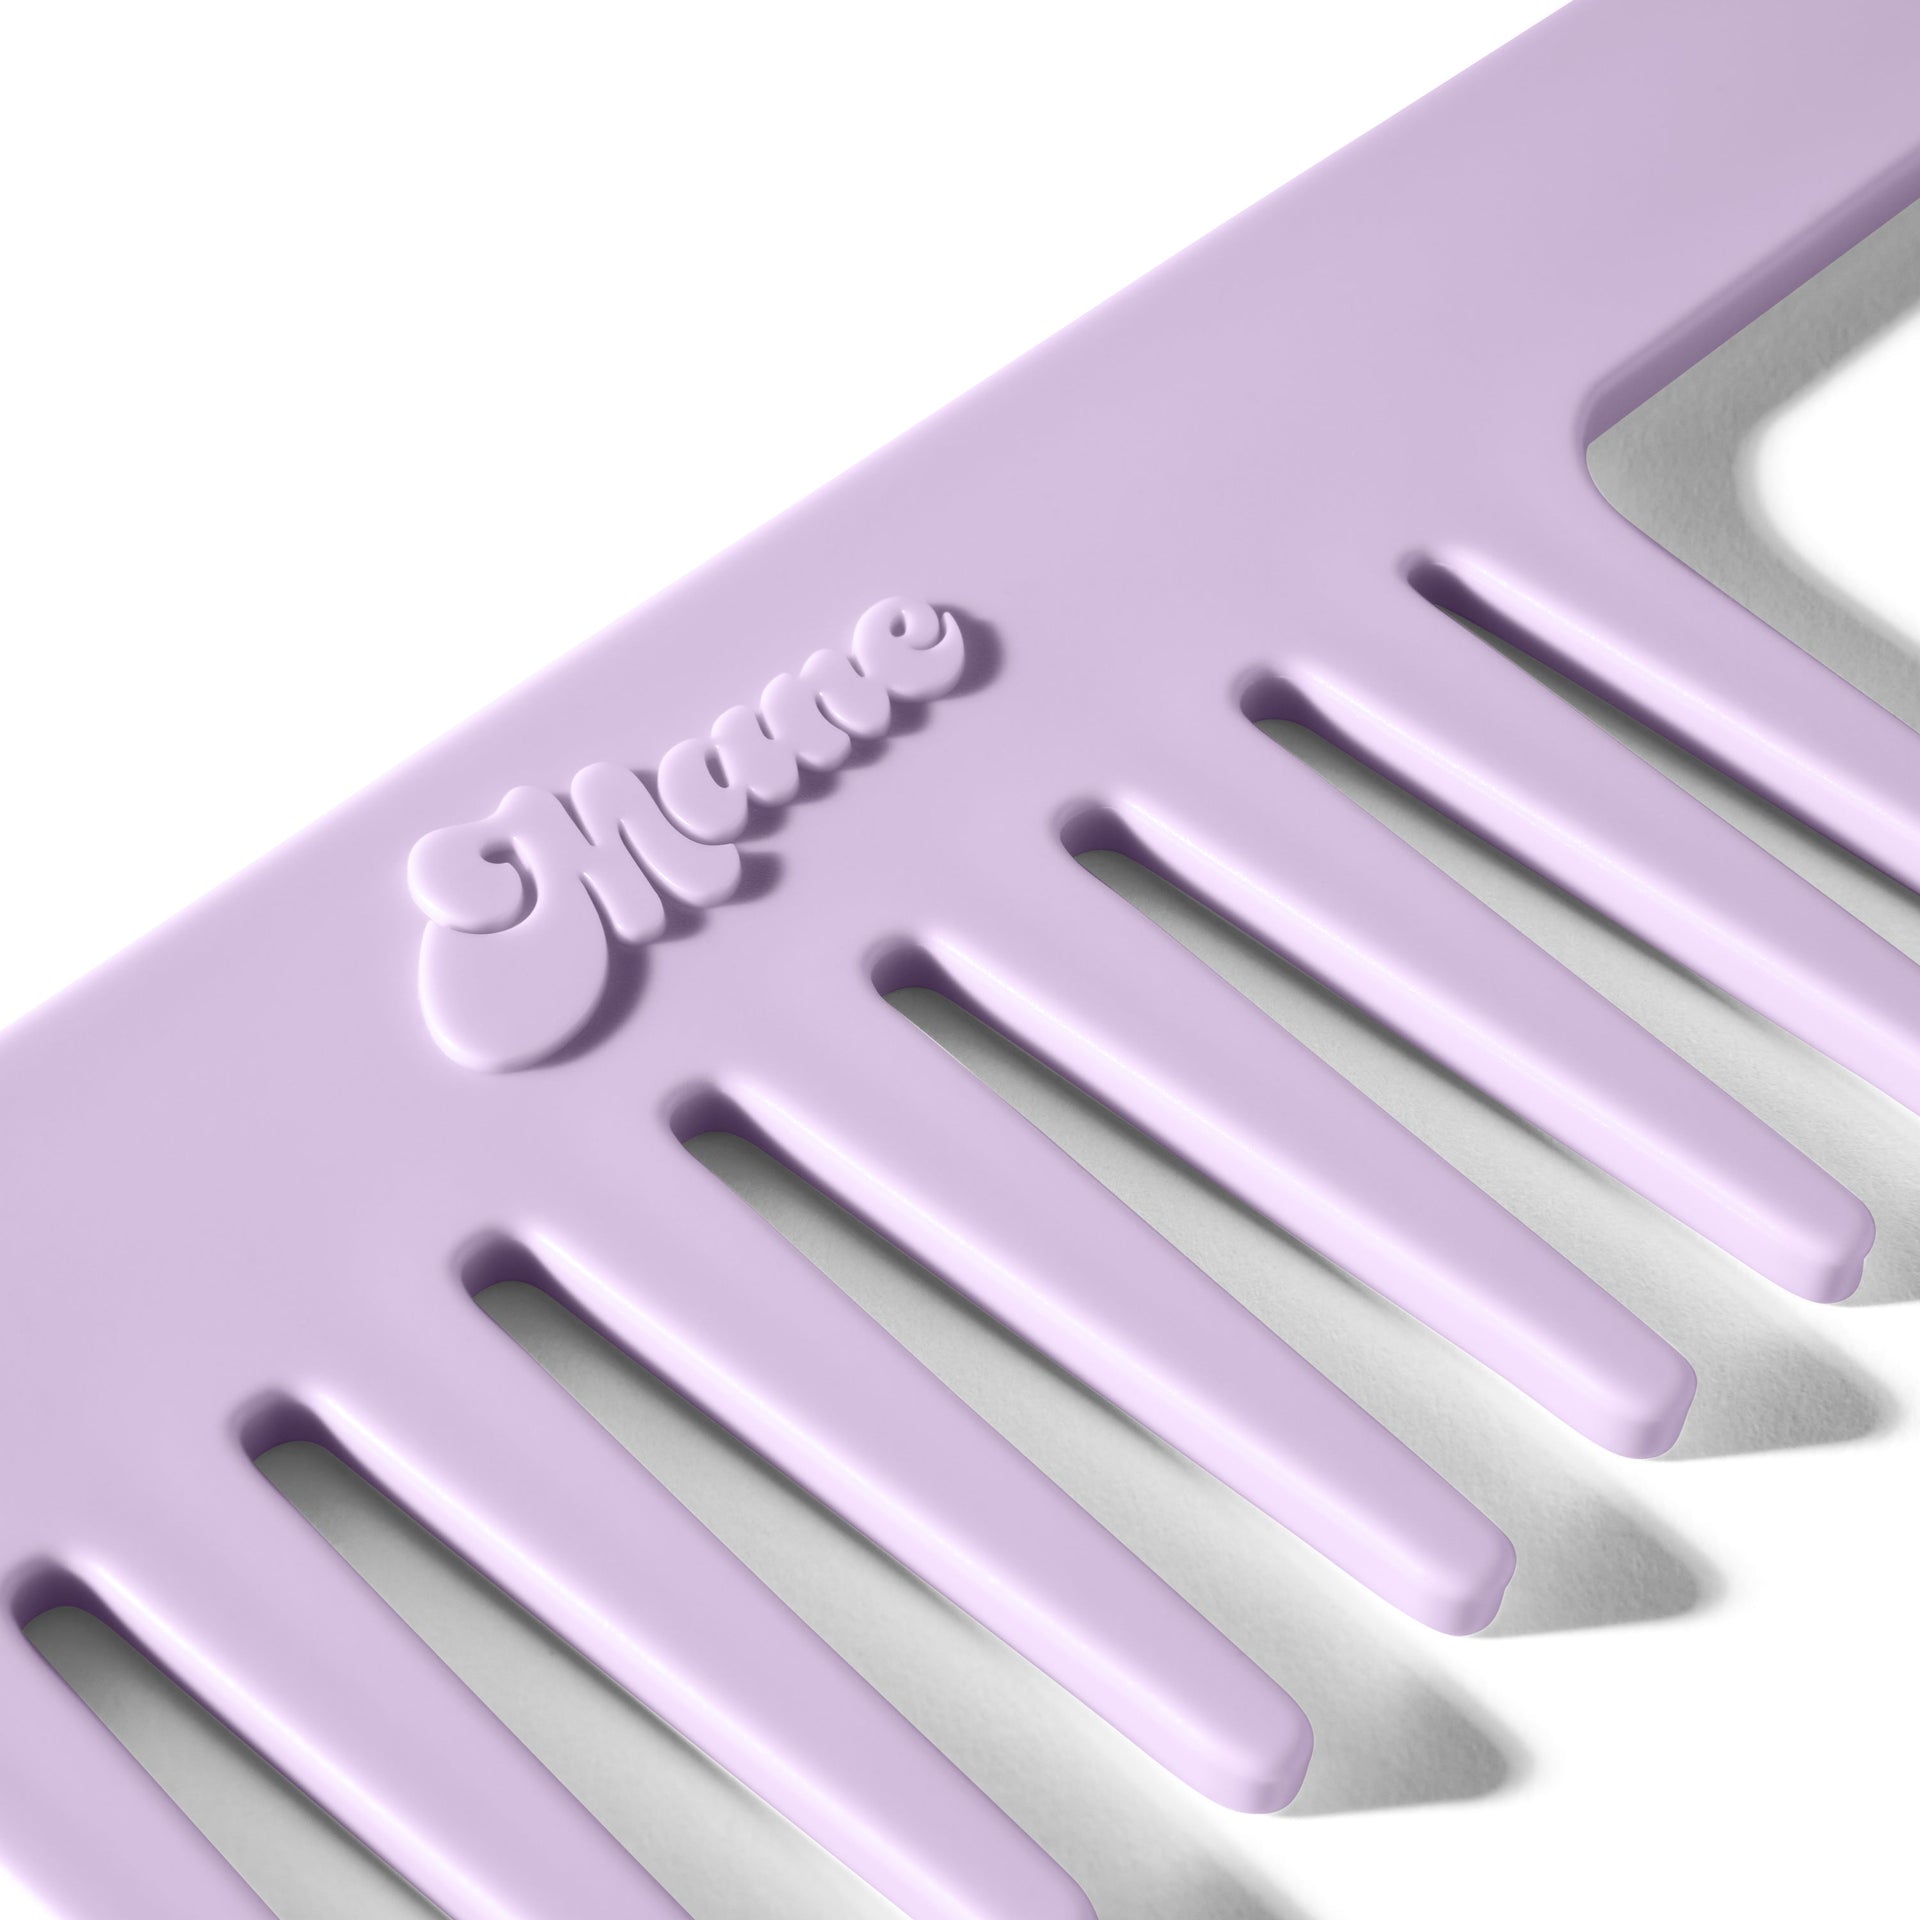 mane not ur average wide-tooth comb in purple